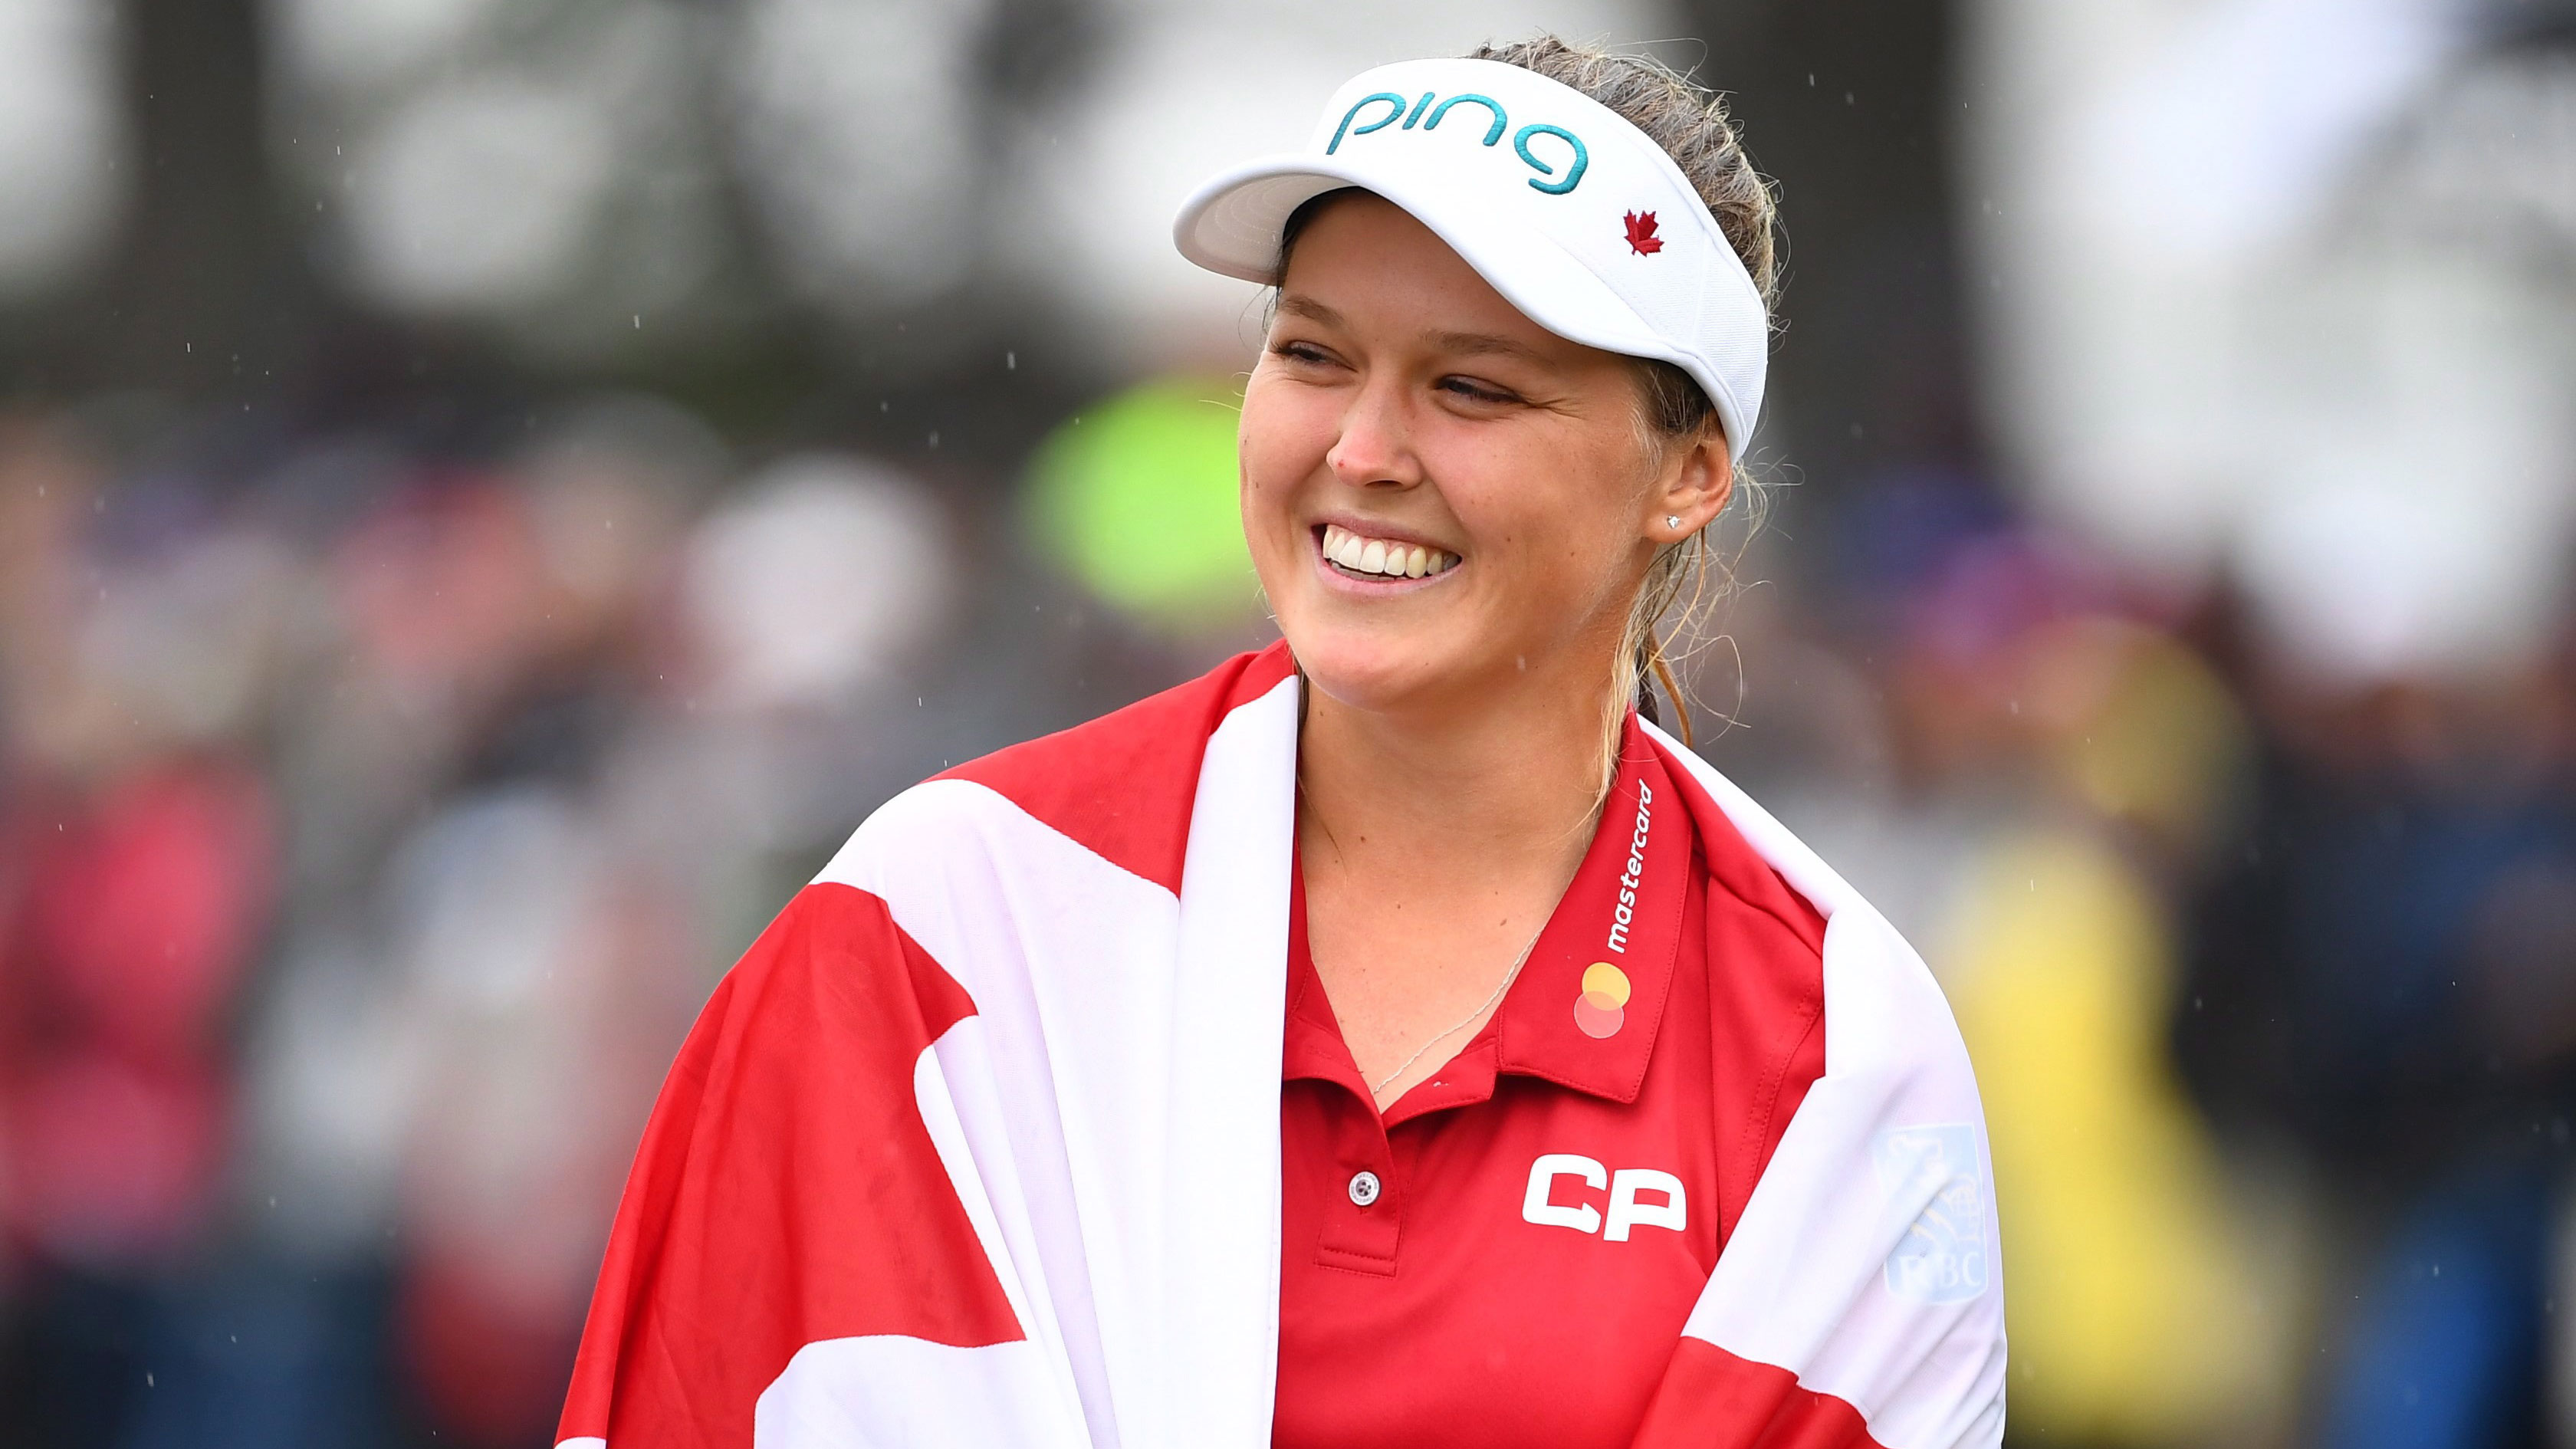 Canada’s Brooke Henderson, wrapped in a Canadian flag, celebrates her historic win at the CP Women's Open